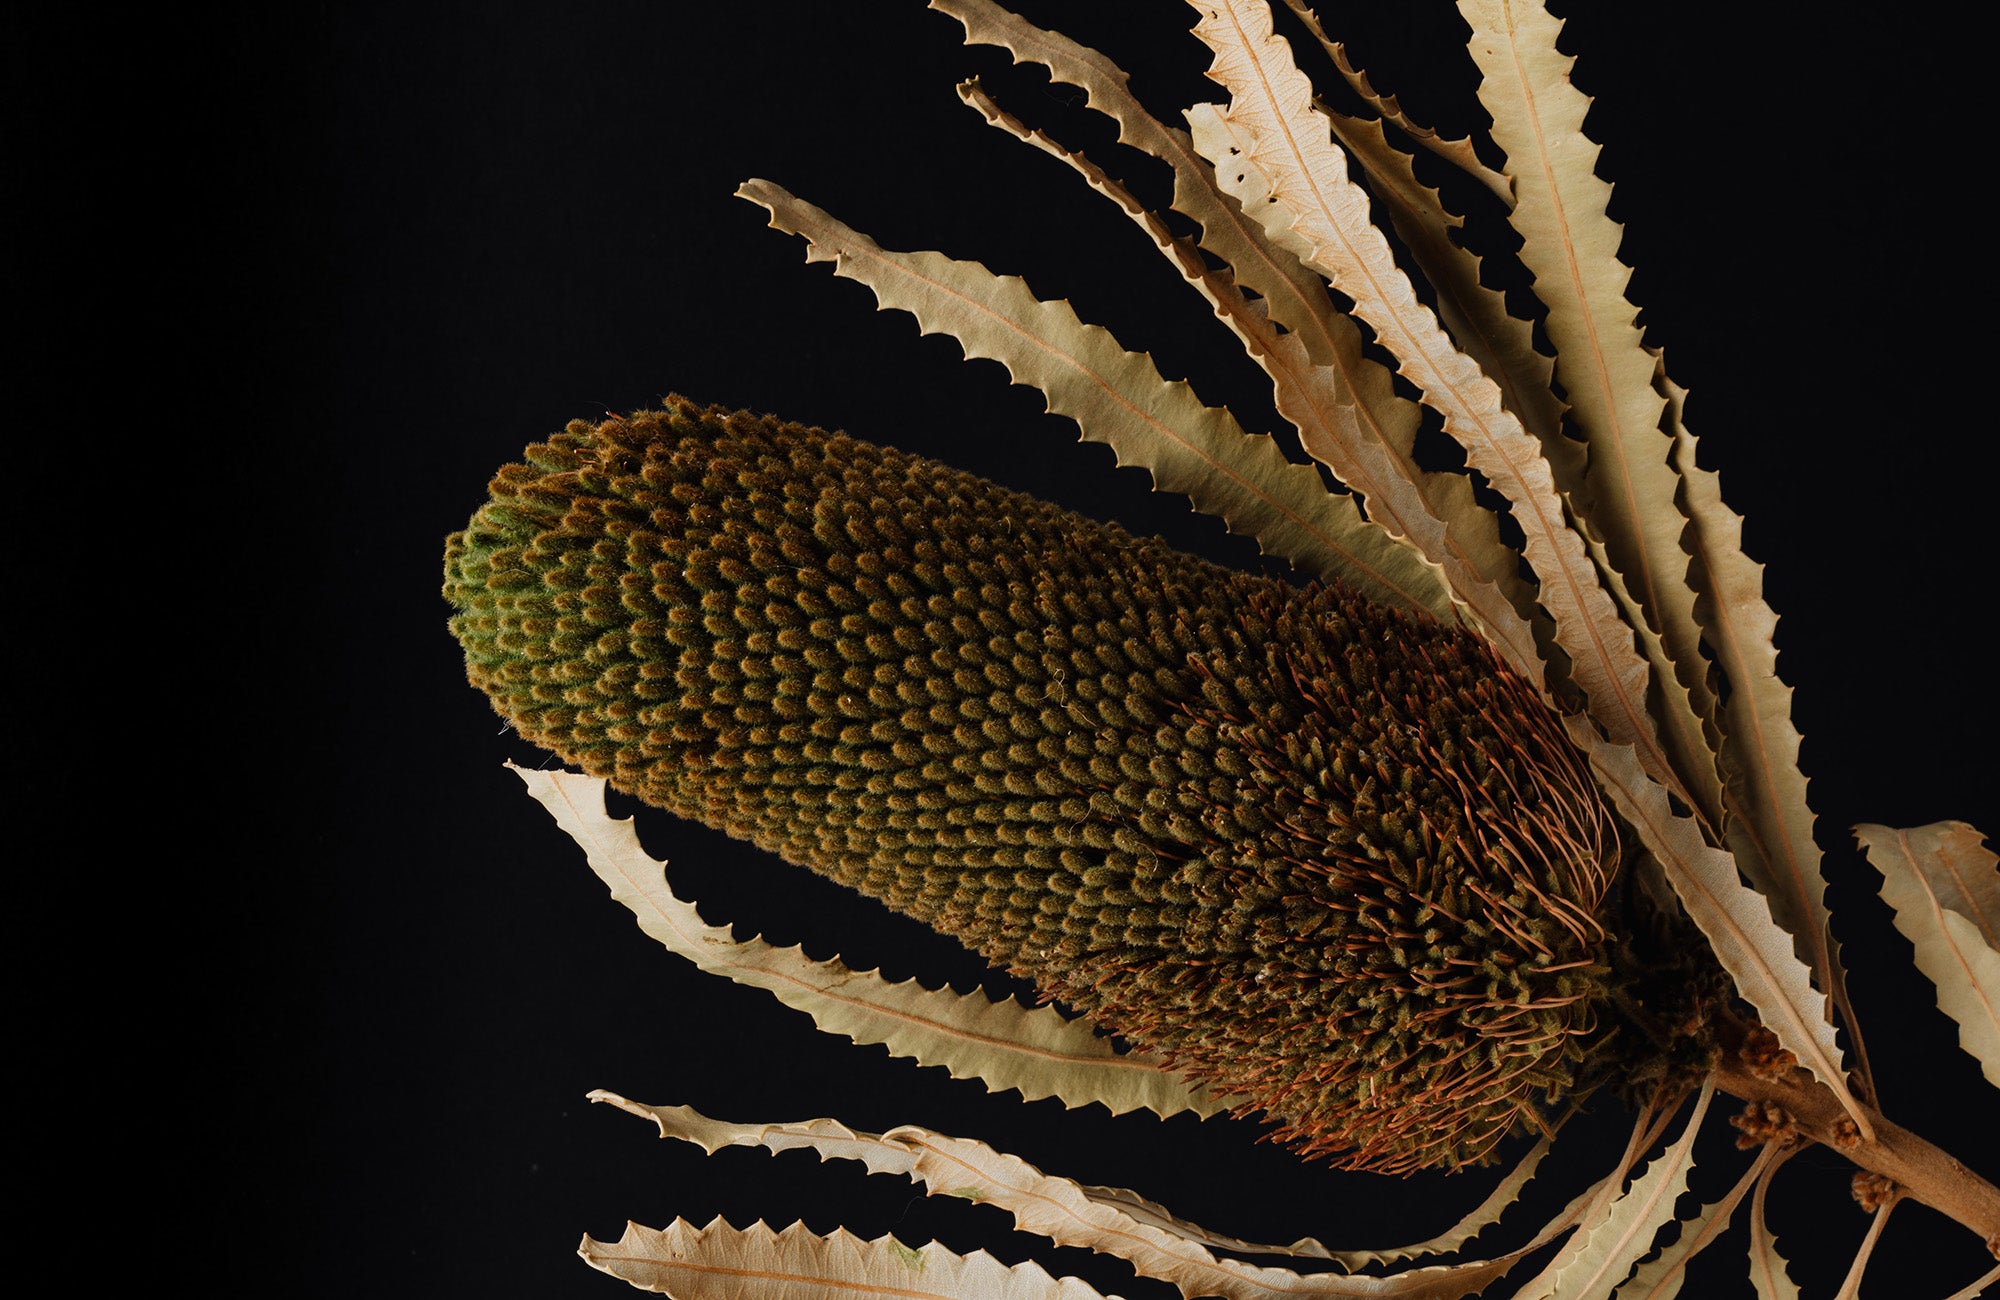 Banksia Flower with Black Background